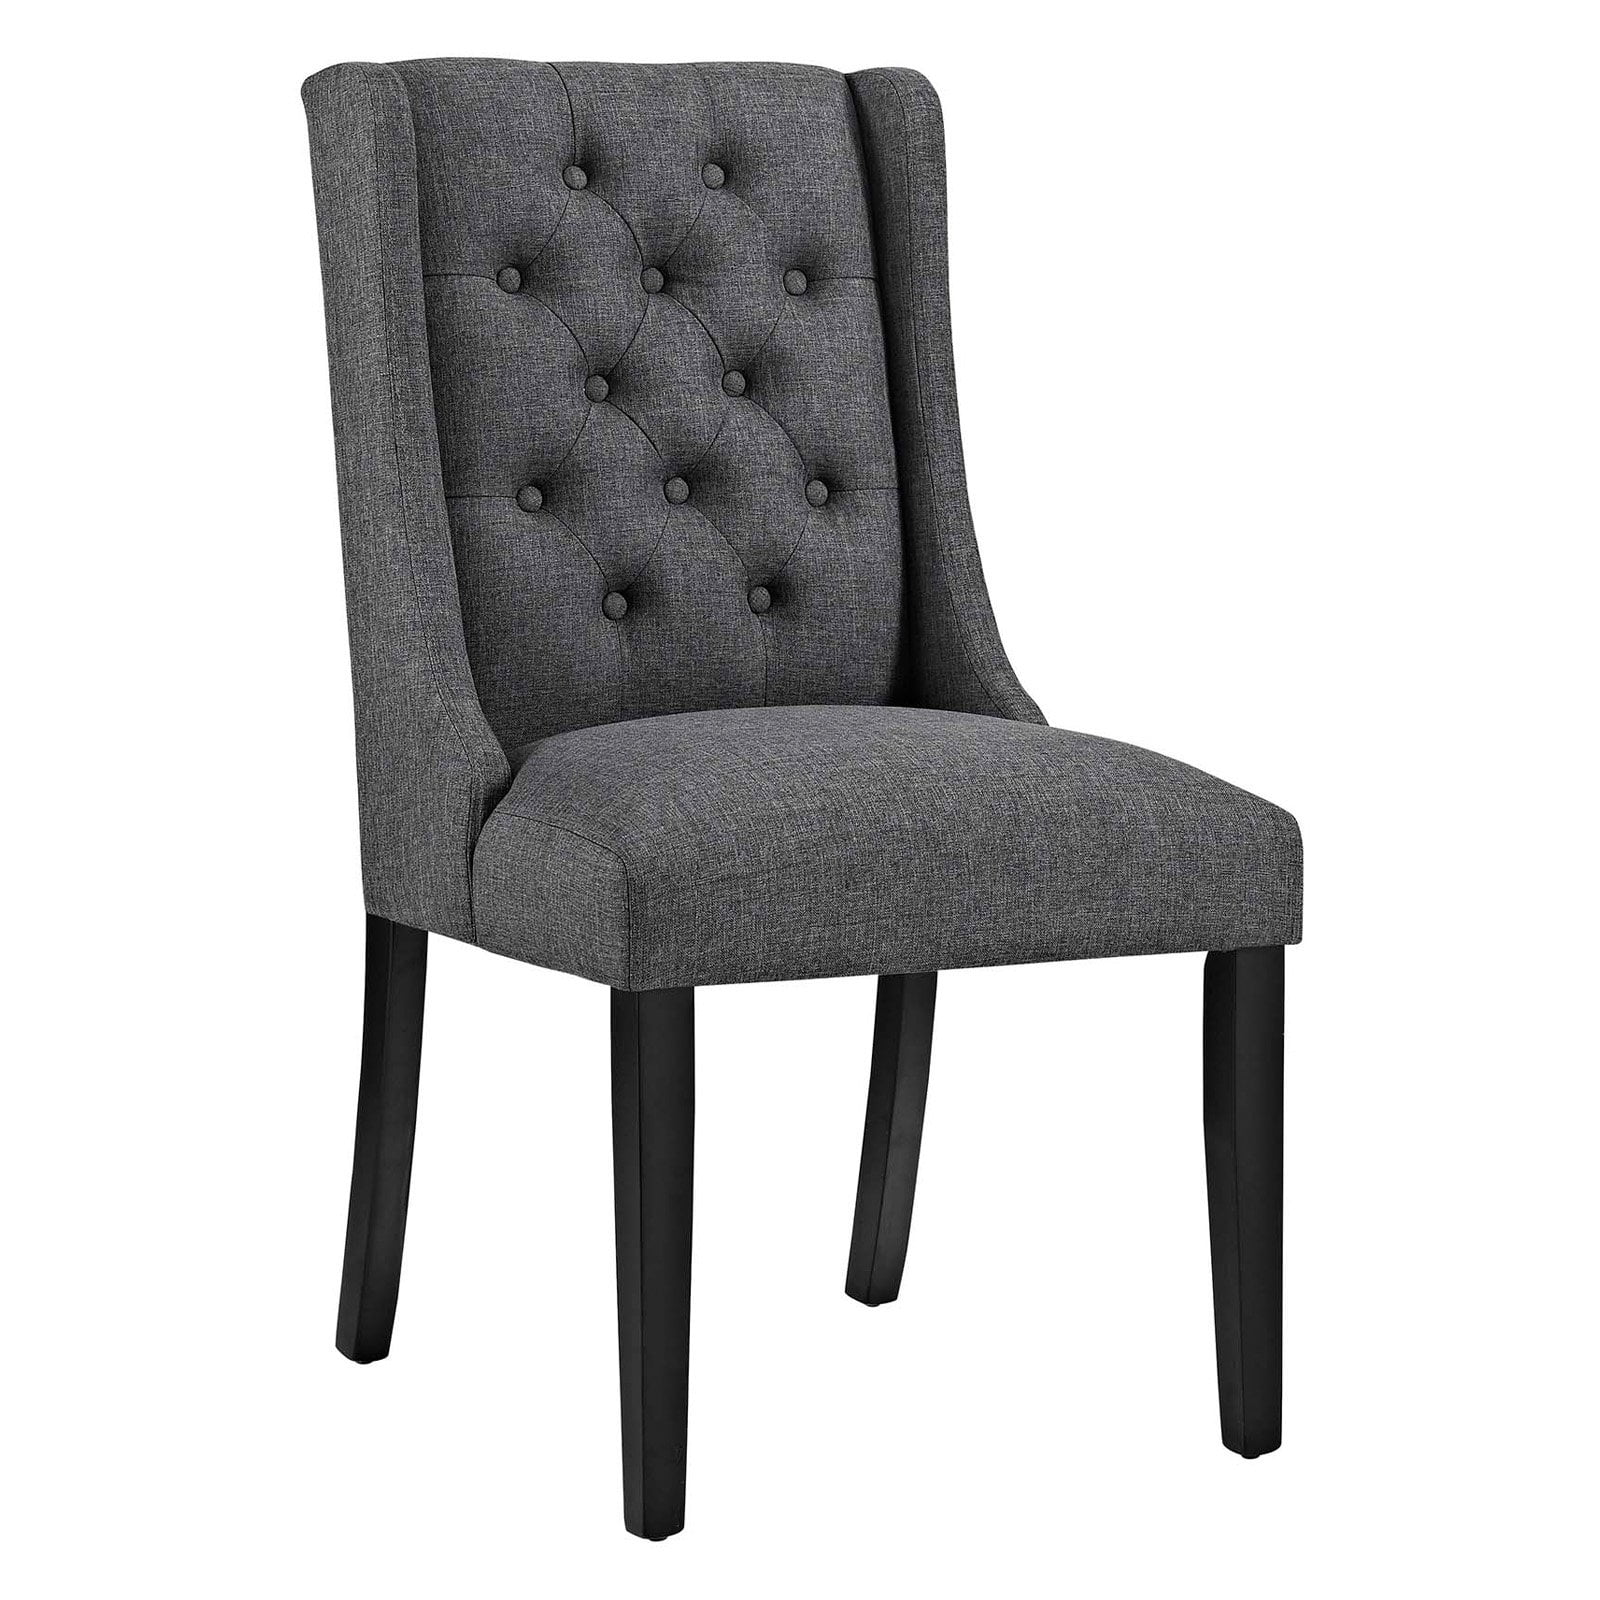 Modway Baronet Upholstered Dining Side Chair, Multiple Colors - Walmart.com